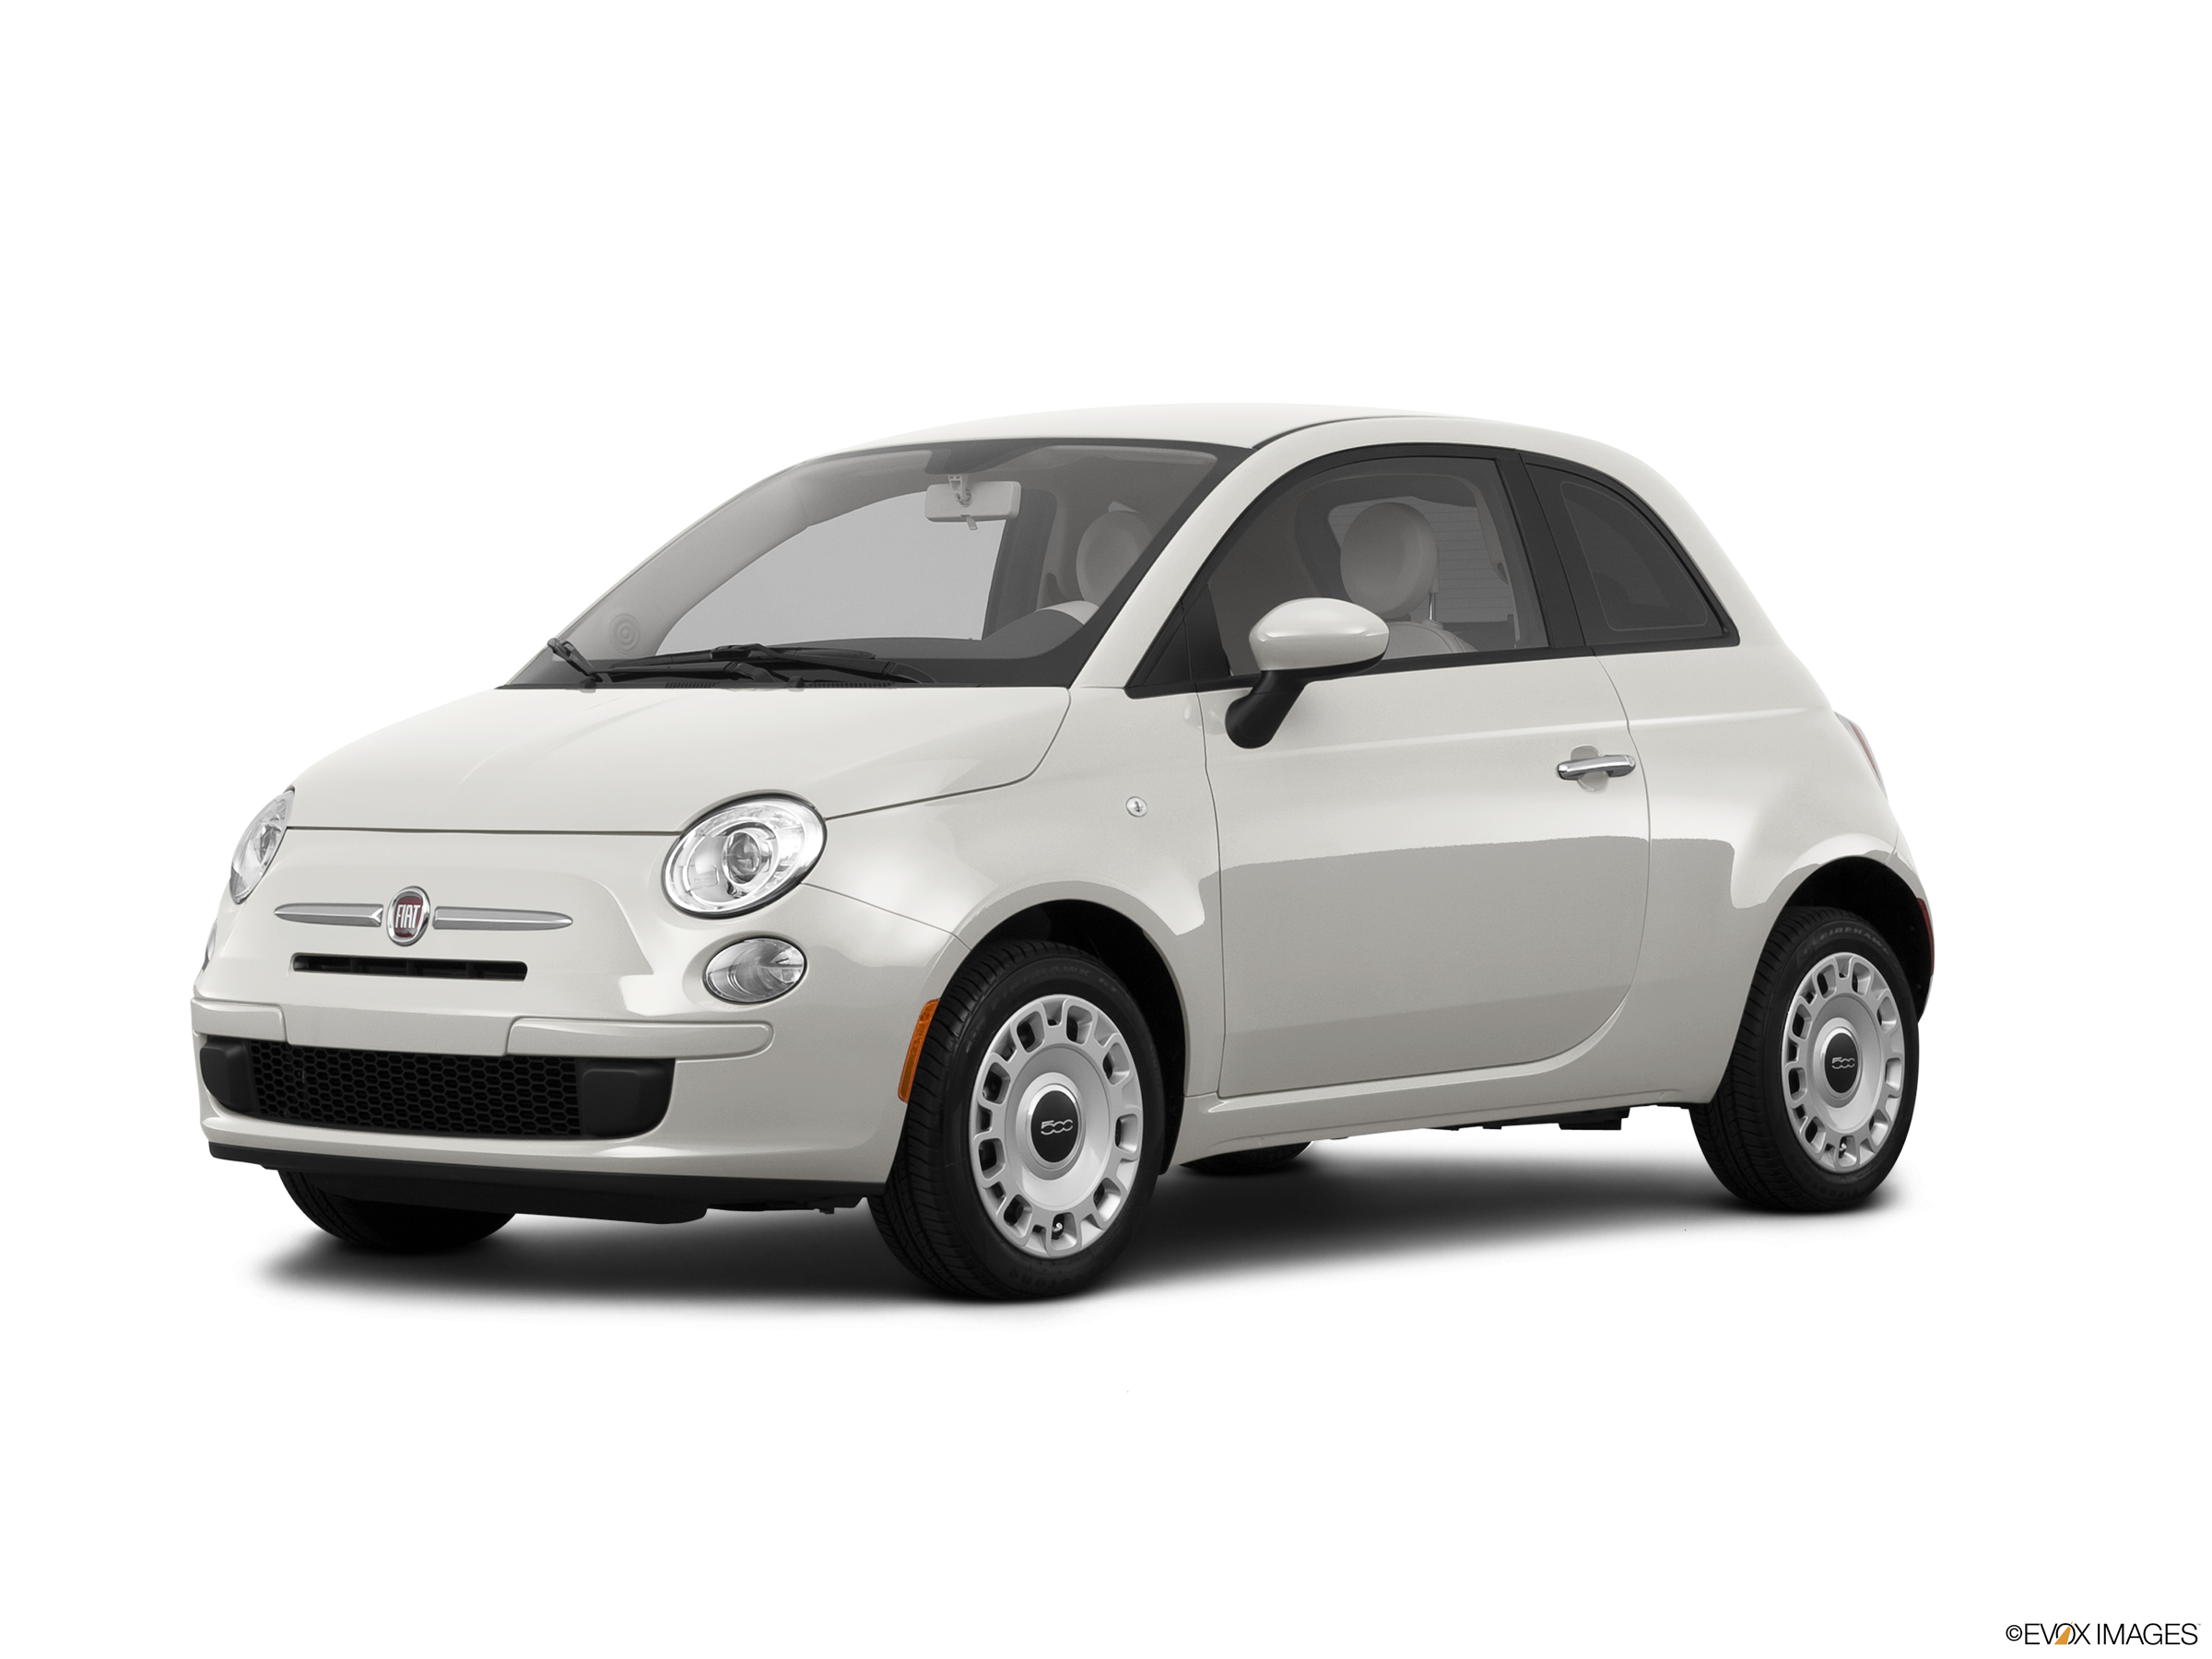 2013 FIAT 500 Values for Sale | Kelley Blue Book